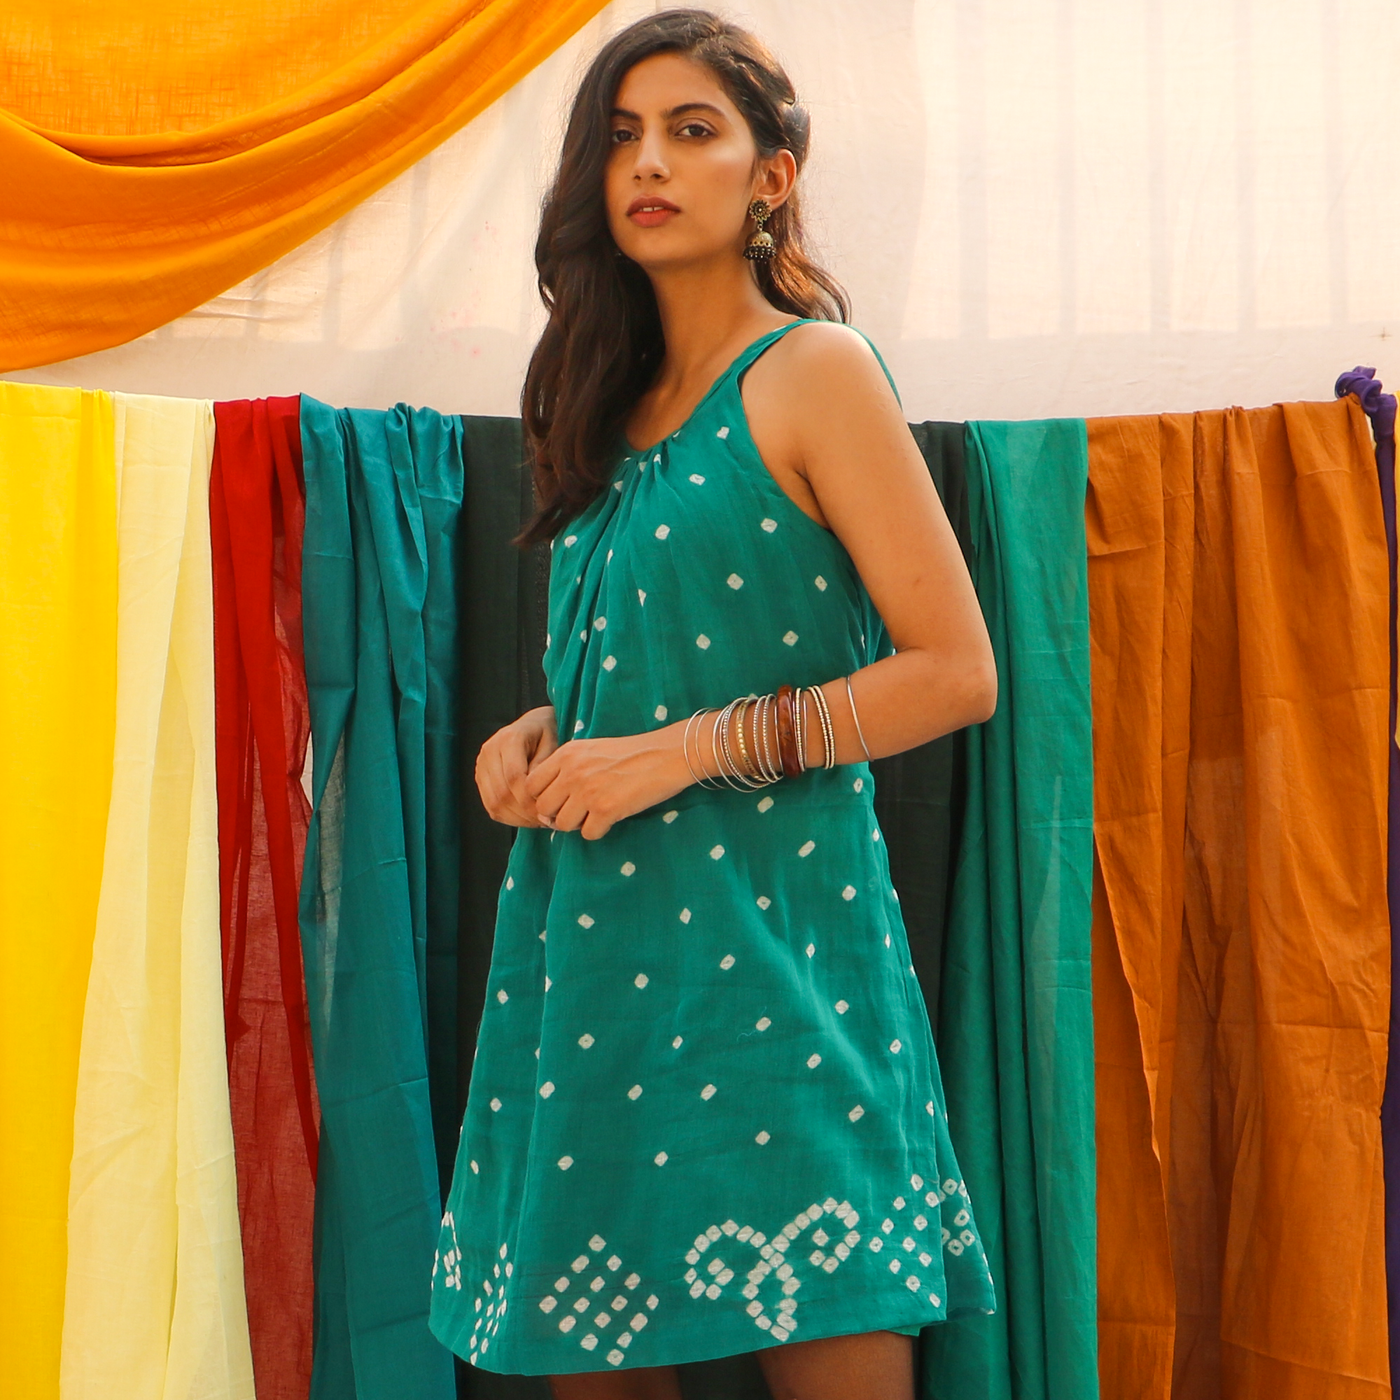 mini bandhani dress drawstrings at waist tie at the back comes with a slip dress to wear underneath.